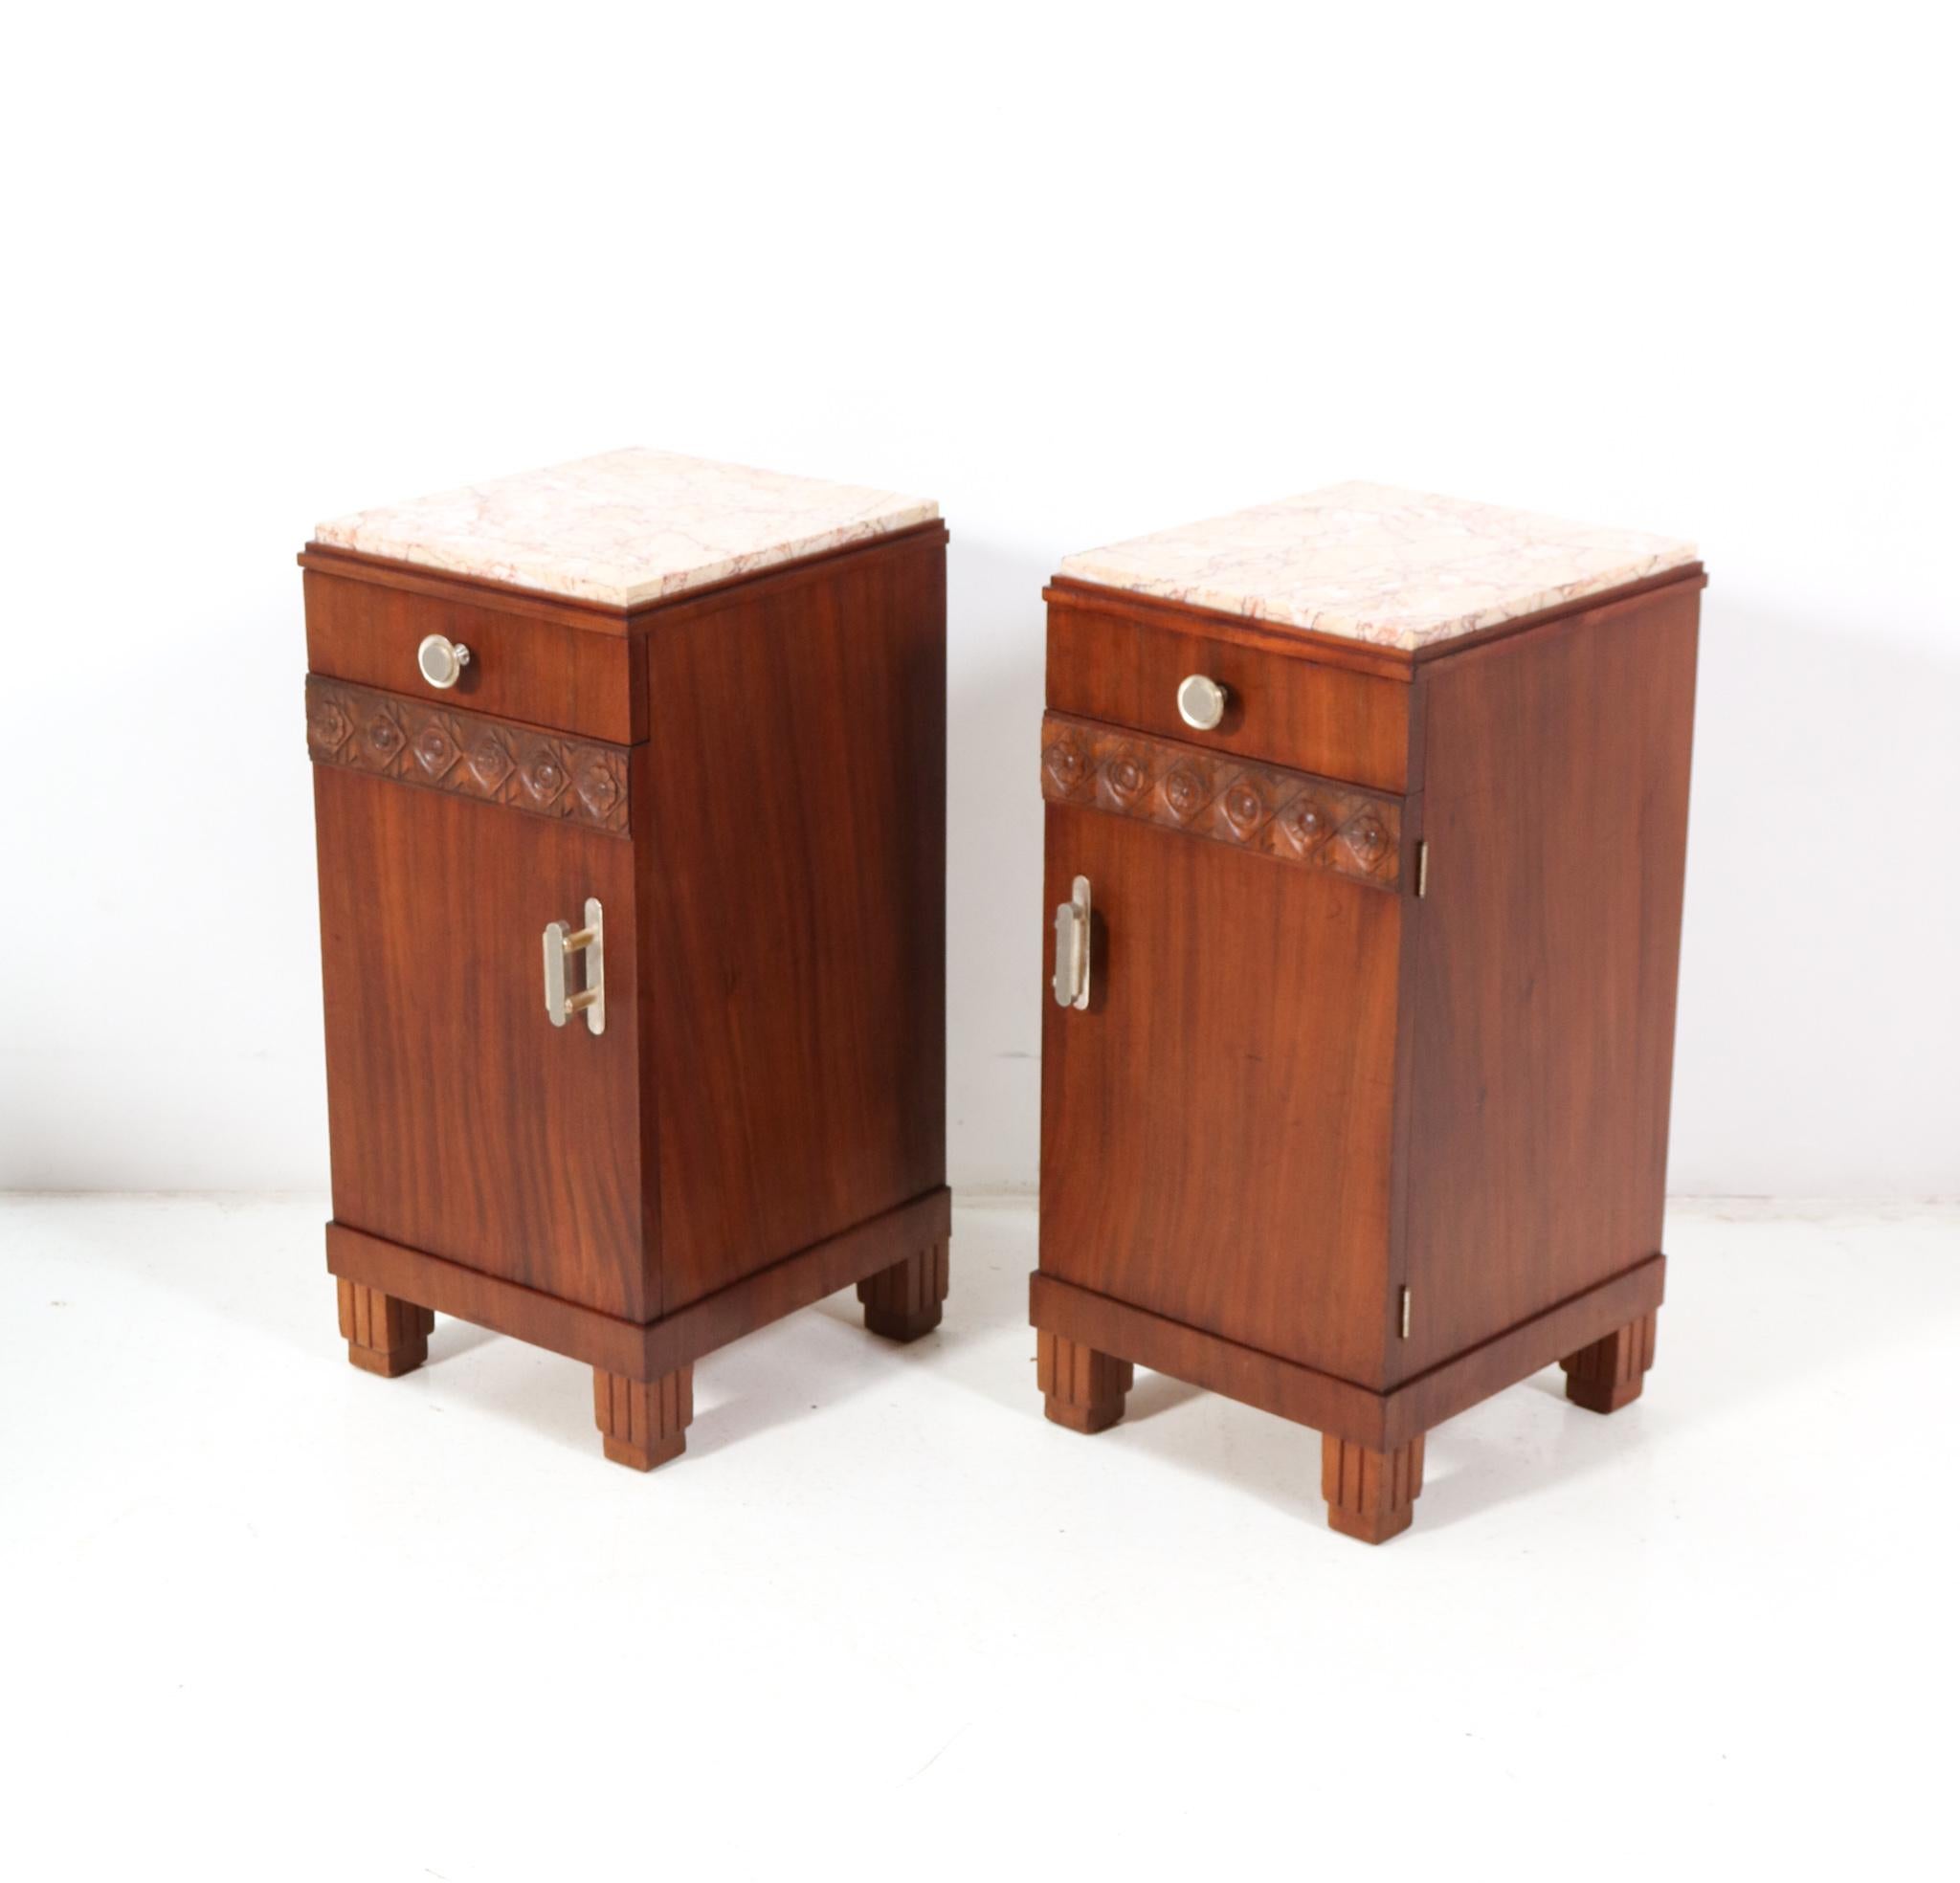 Two Walnut Art Deco Nightstands or Bedside Tables, 1930s For Sale 1